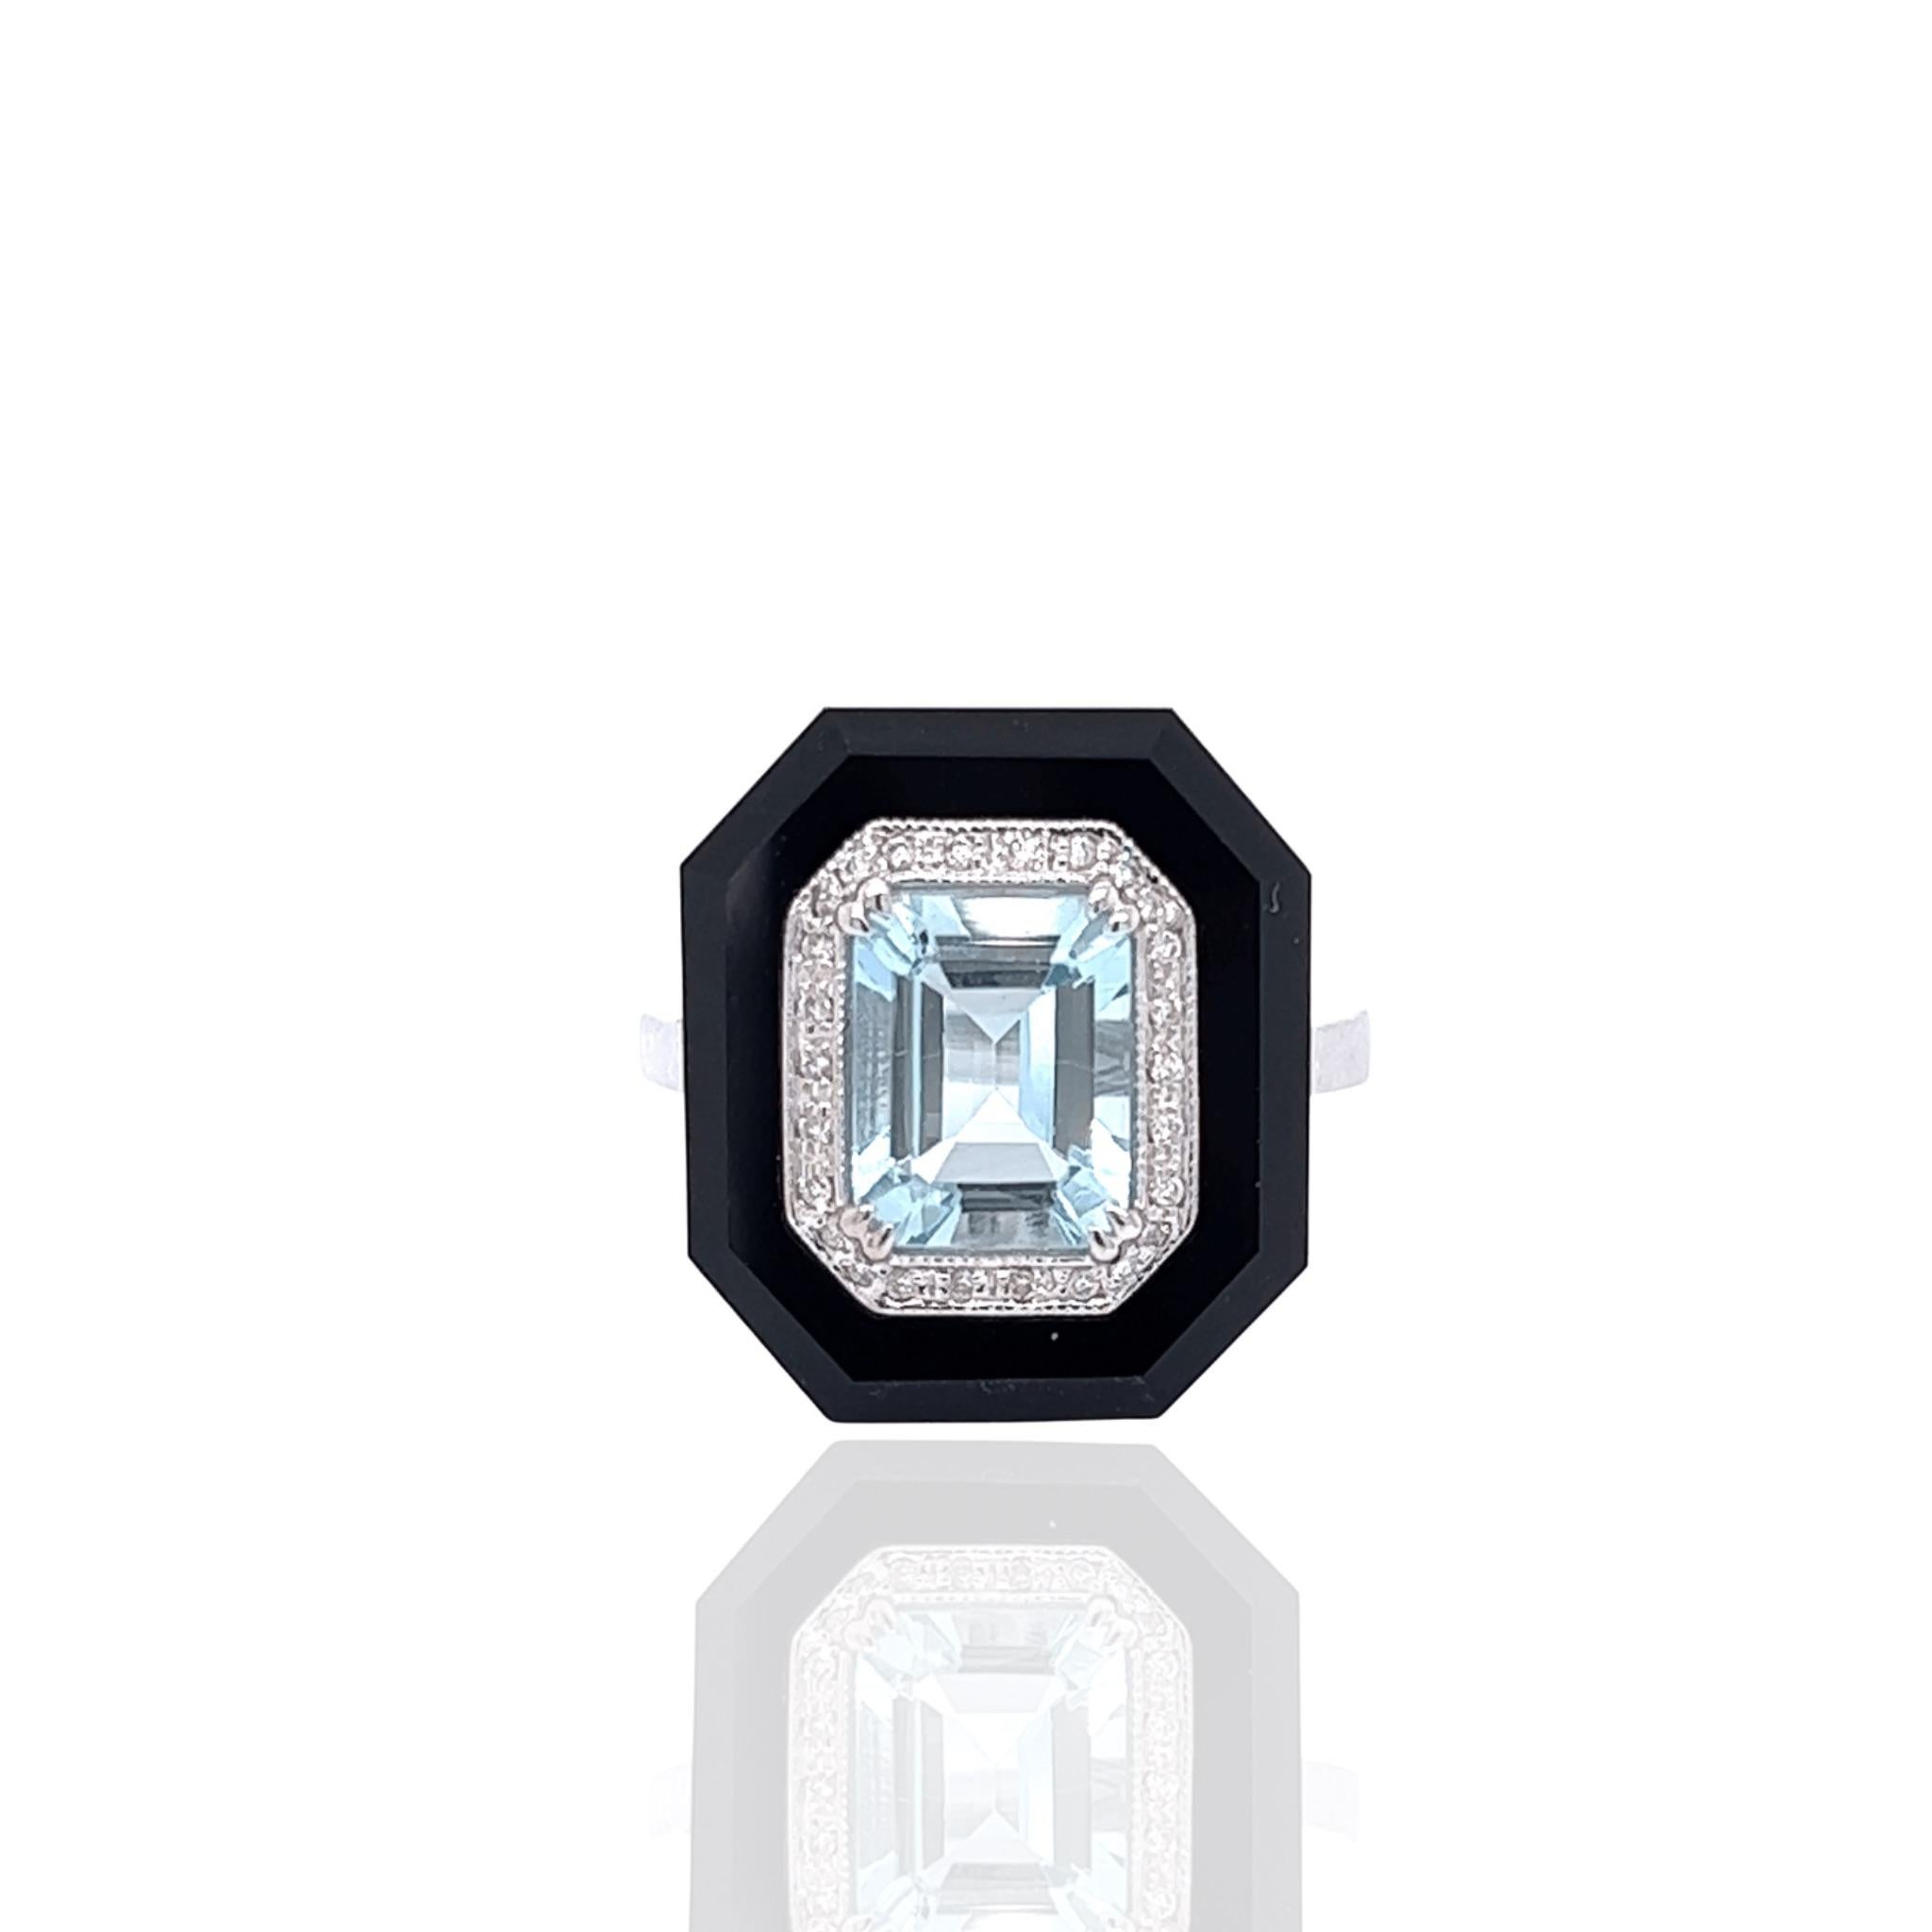 A TB Exclusive! The centerpiece of this ring is 1.9 carats of vivid aquamarine, surrounded by 2.4 carats of onyx and 0.12 carats of brilliant diamonds. All of the stones are set in 6.11 grams of 14k white gold. You'll love wearing this vintage